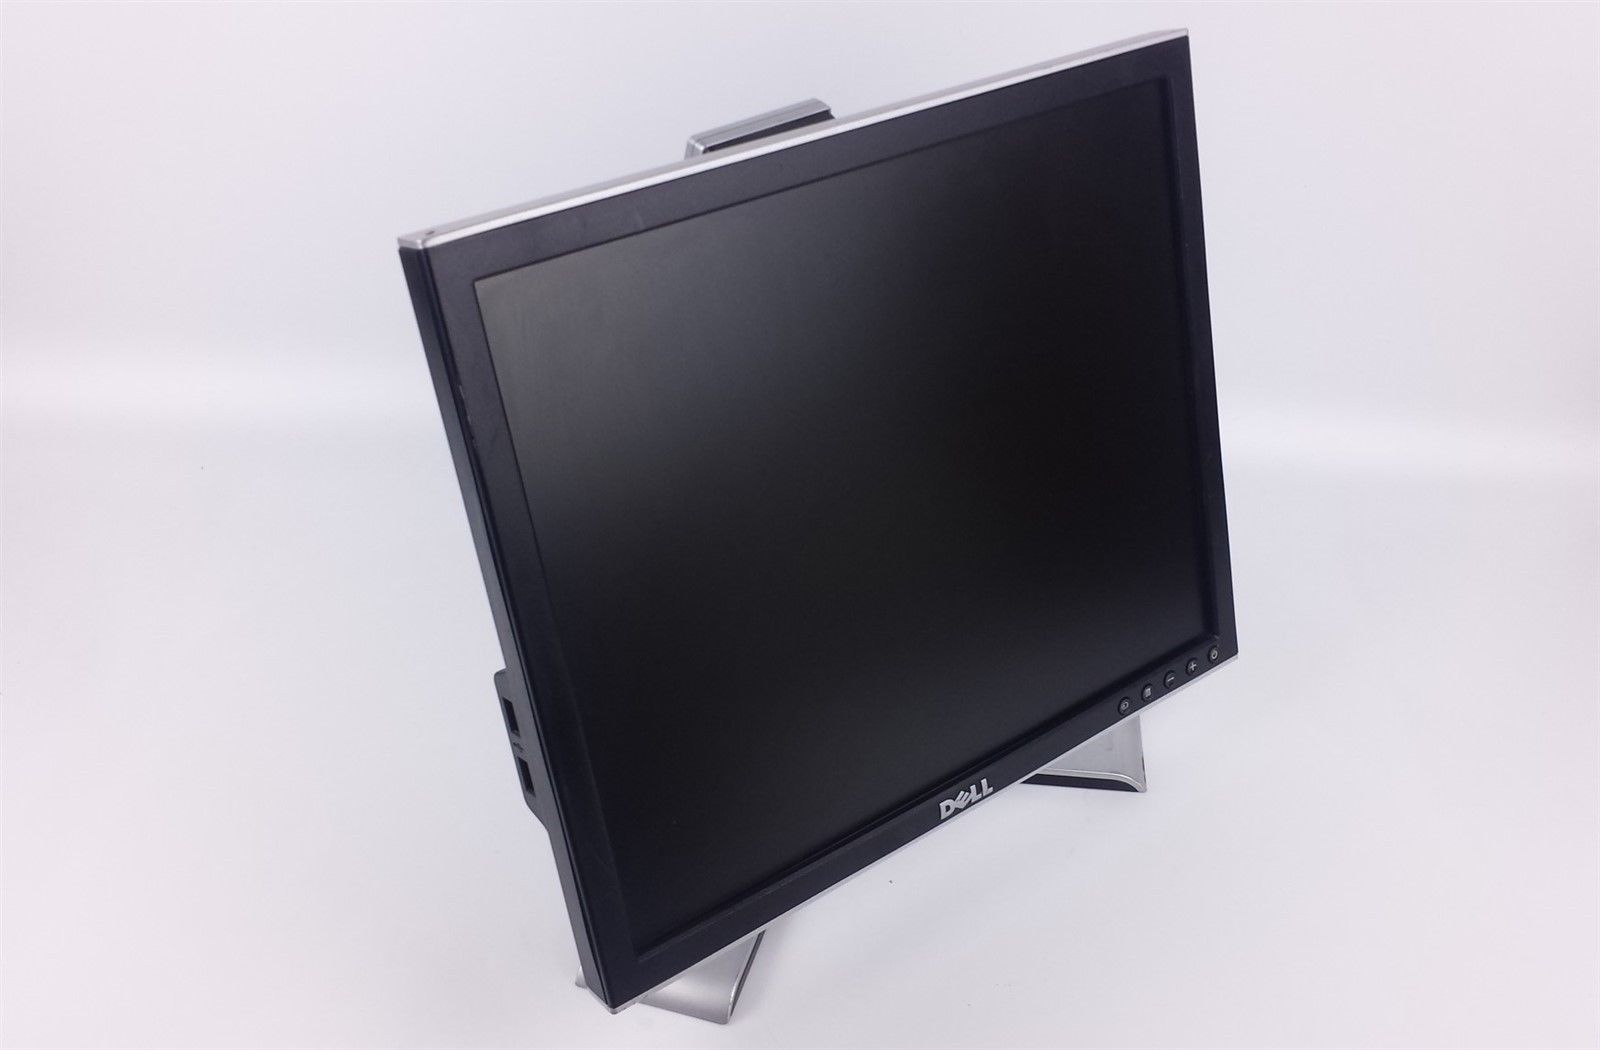 Dell UltraSharp 1707FPc Flat Screen LCD Computer Monitor 17" CC352 w/ Cables